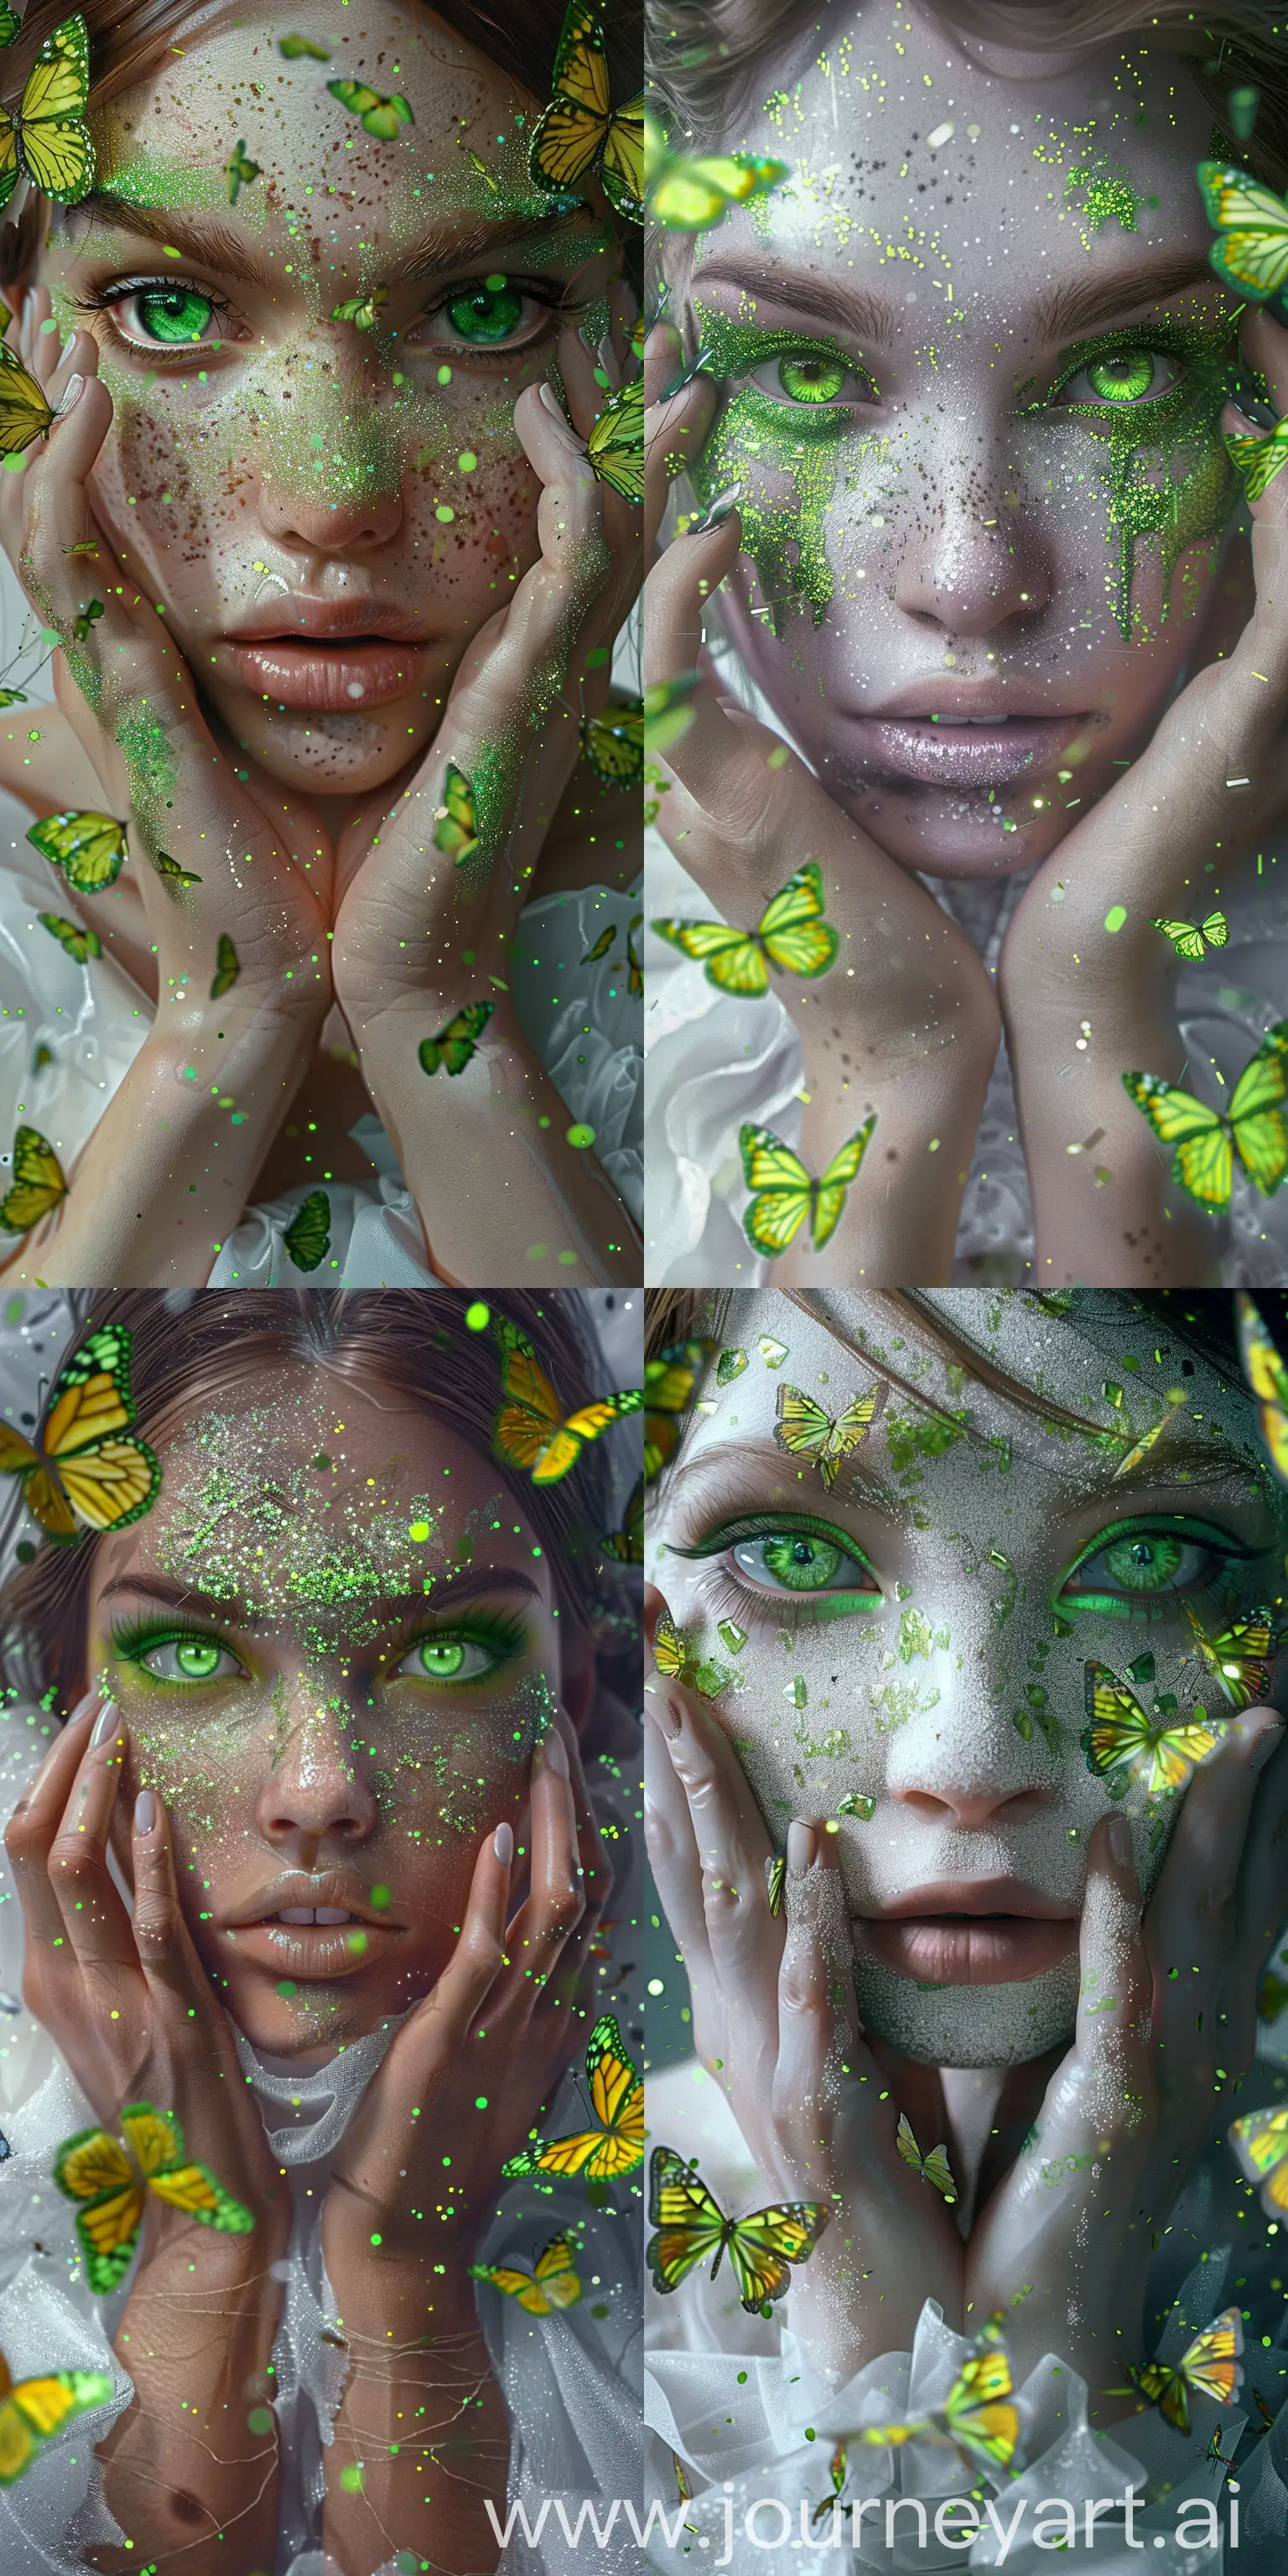 Enchanting-Woman-with-Green-Eyes-Surrounded-by-Butterflies